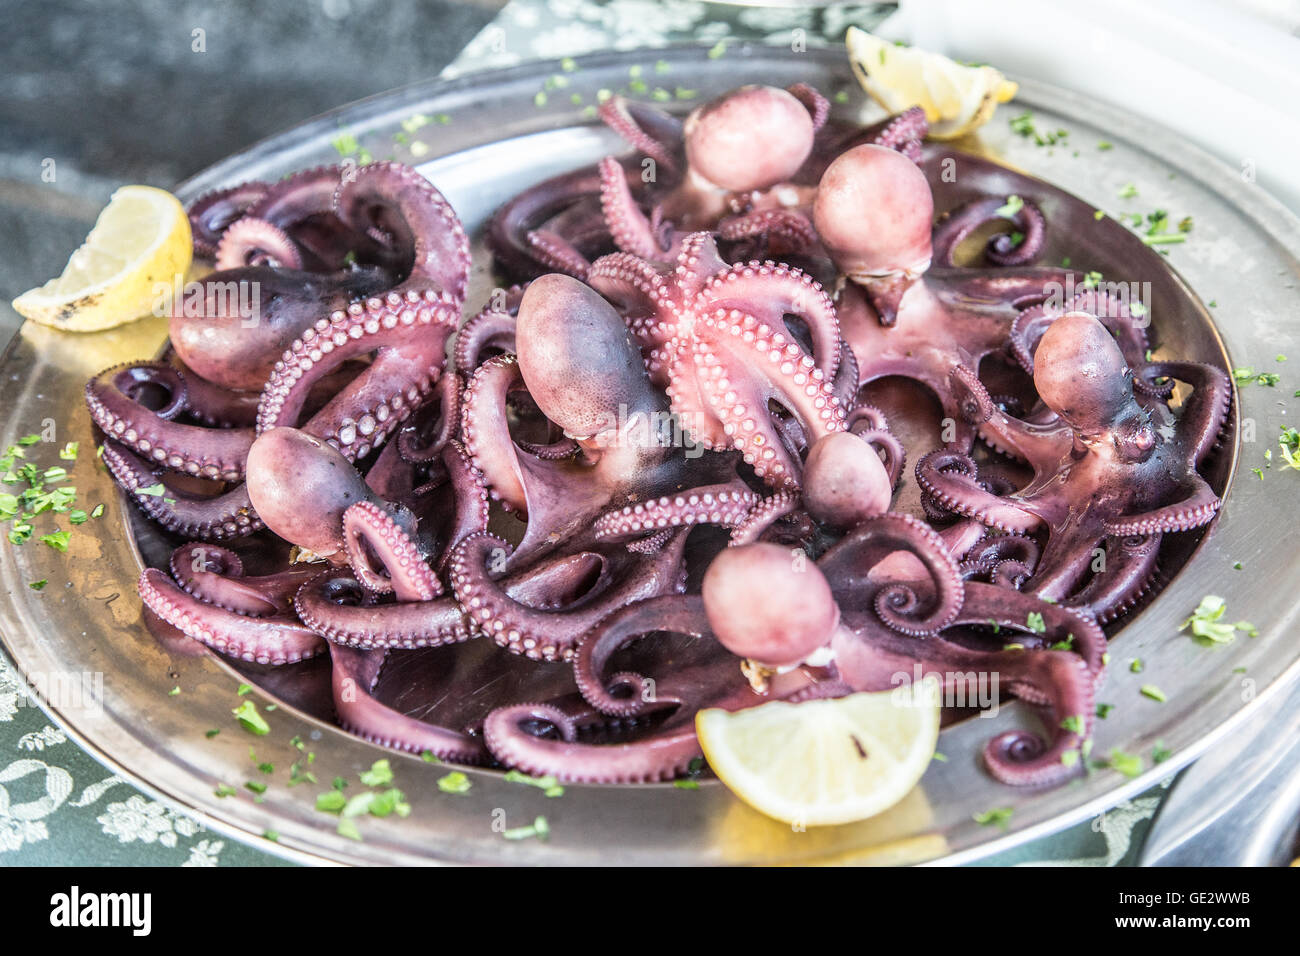 Grilled octopus. Traditional Mediterranean dish. Stock Photo